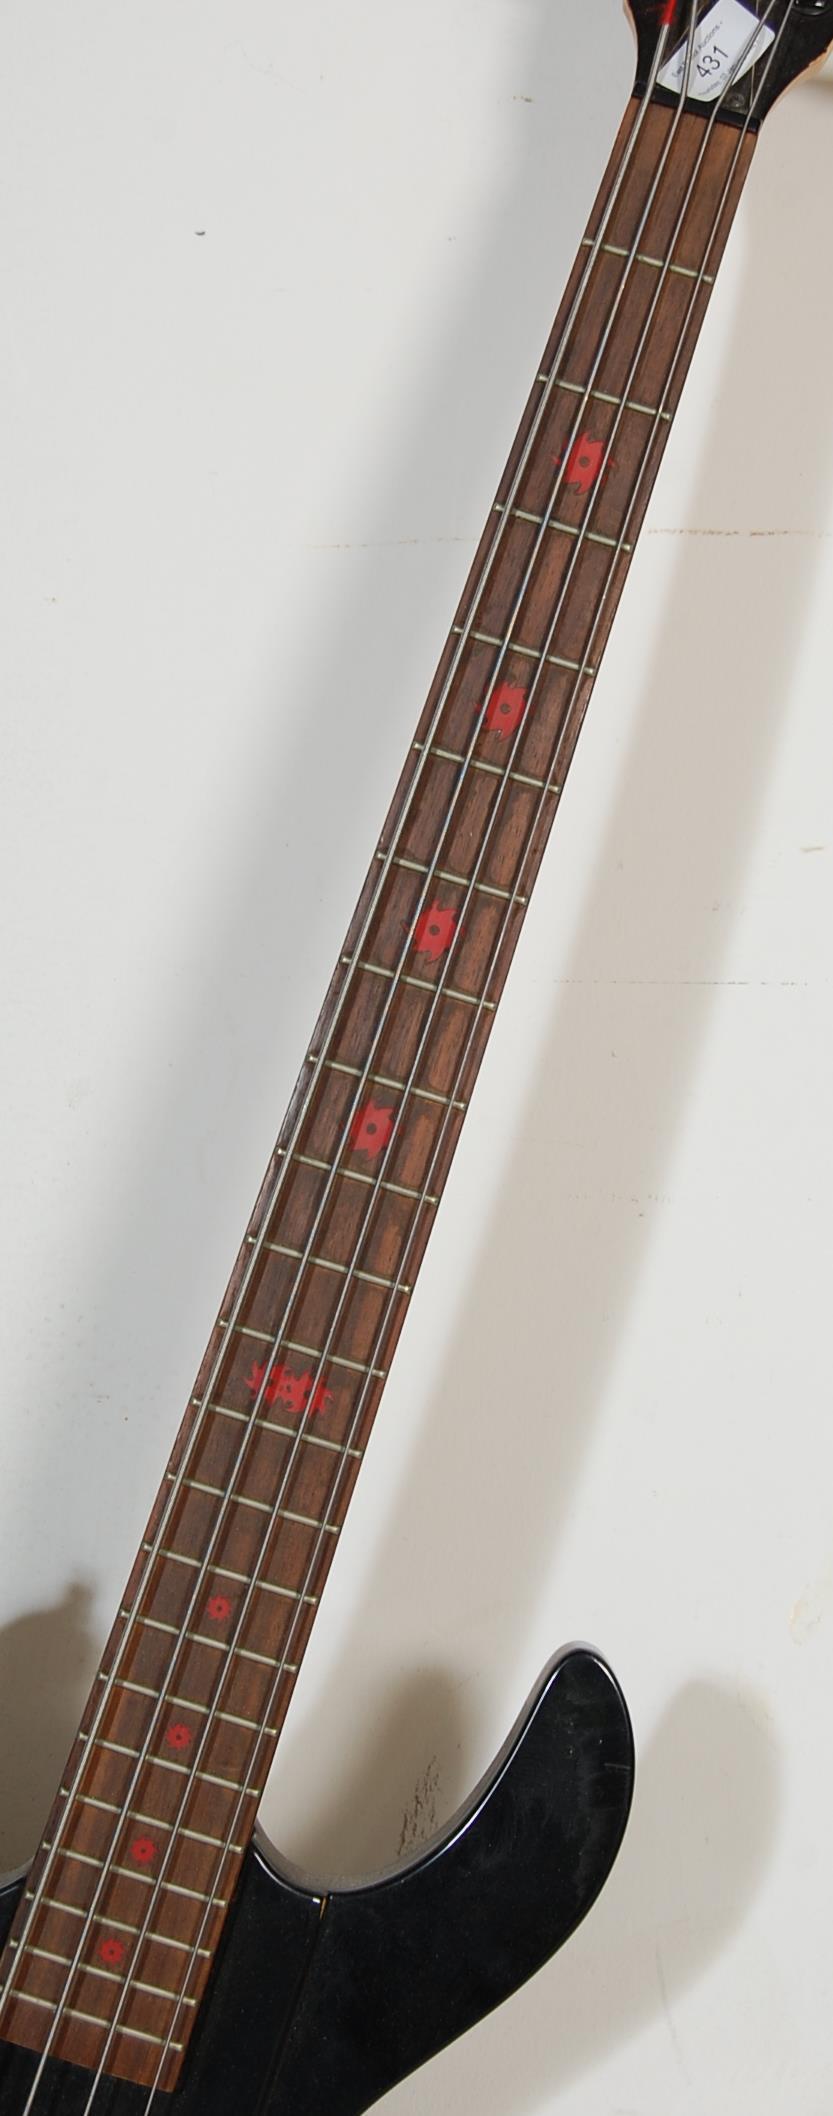 VINTAGE LATE 20TH CENTURY DEAN BASS GUITAR - Image 3 of 6